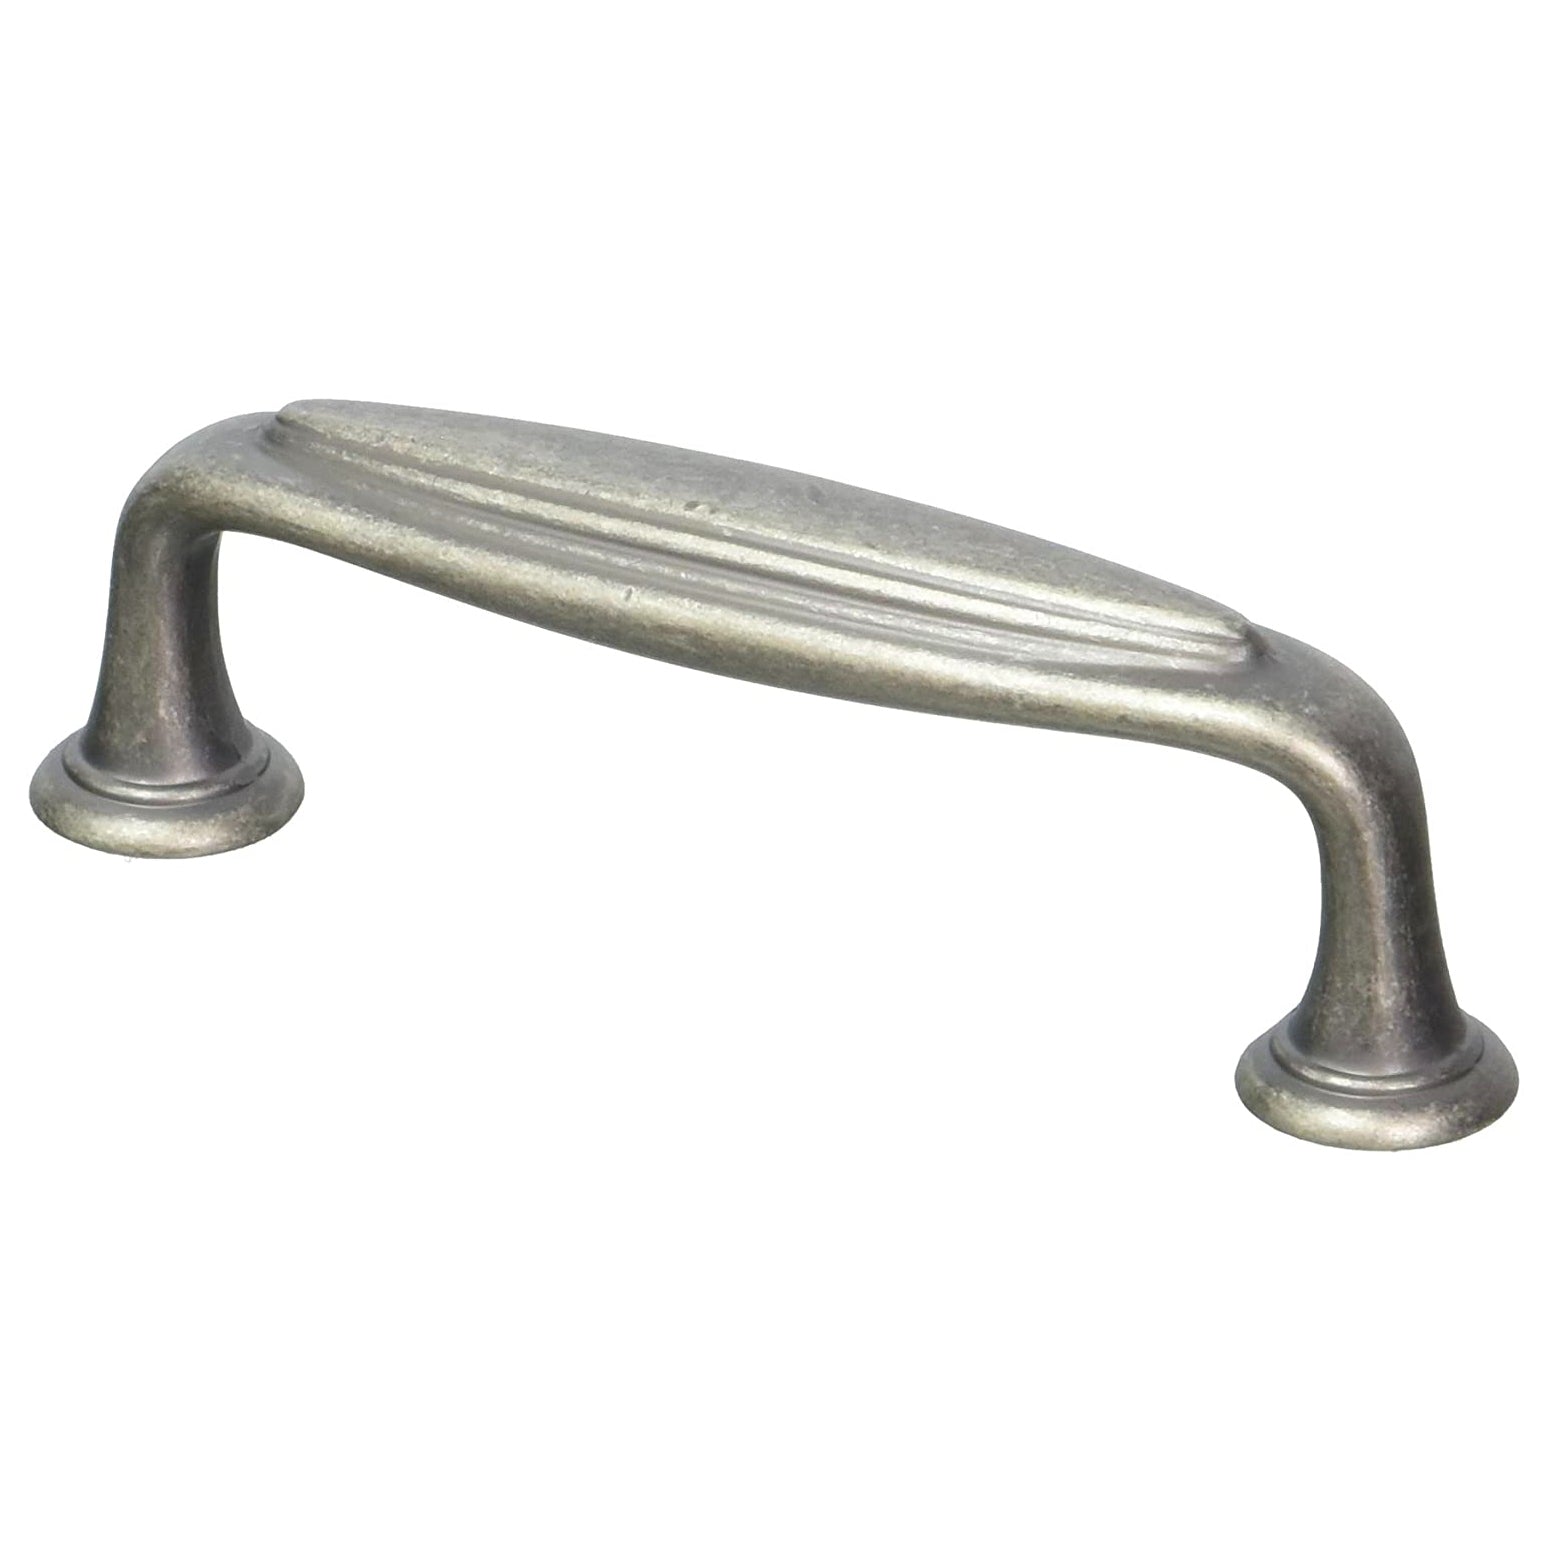 Amerock Mulholland Weathered Nickel 3 inch CTC Cabinet Handle Pull BP53033WN